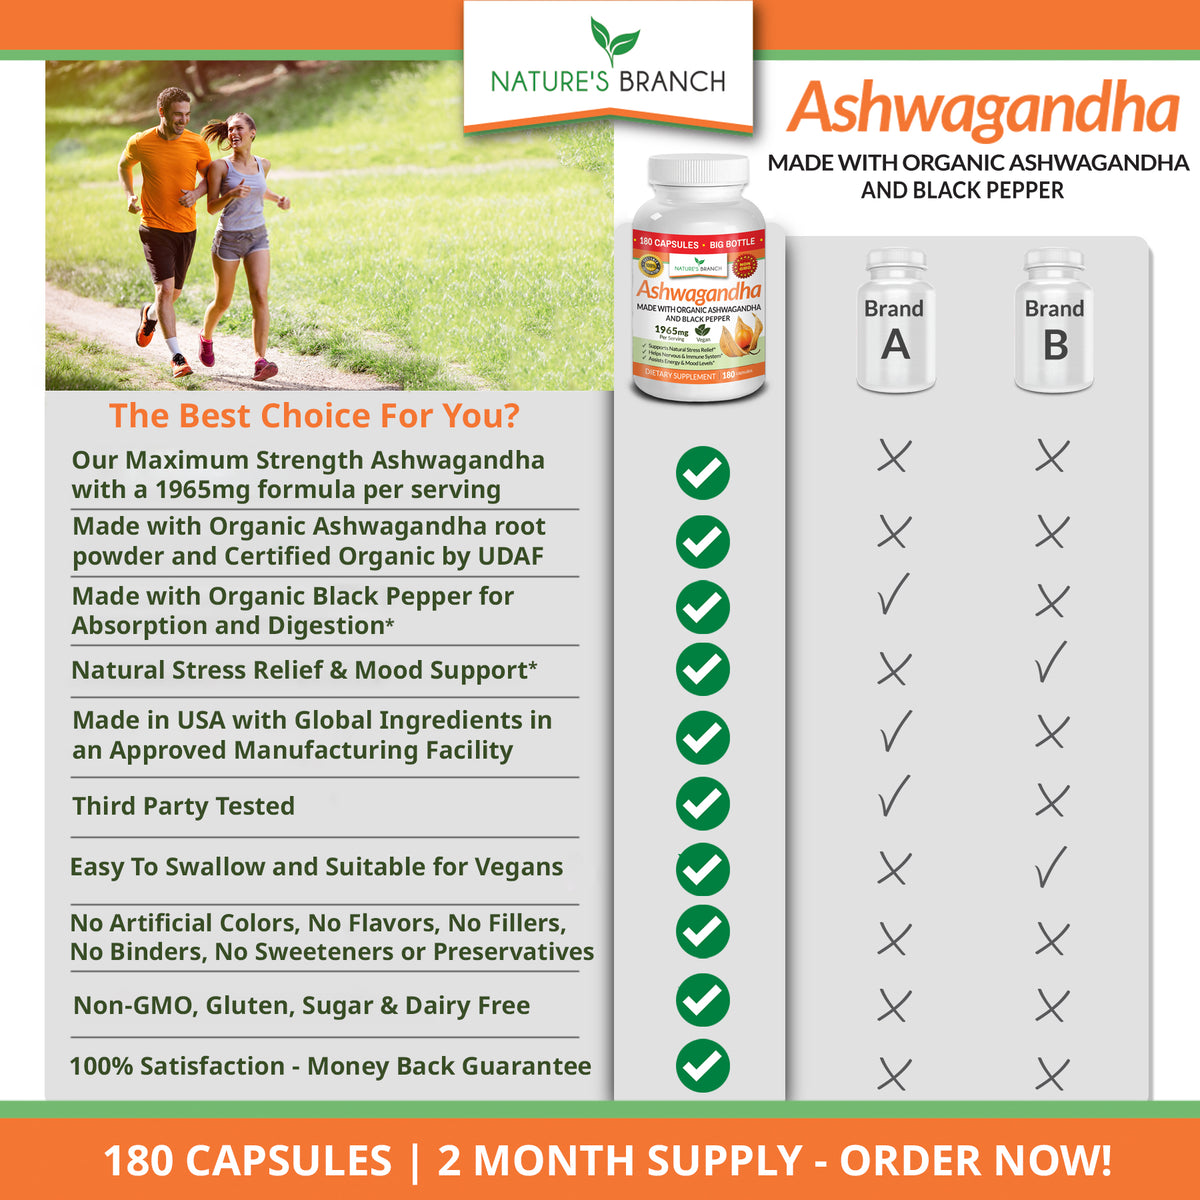 Comparison table showing the benefits of ashwagandha